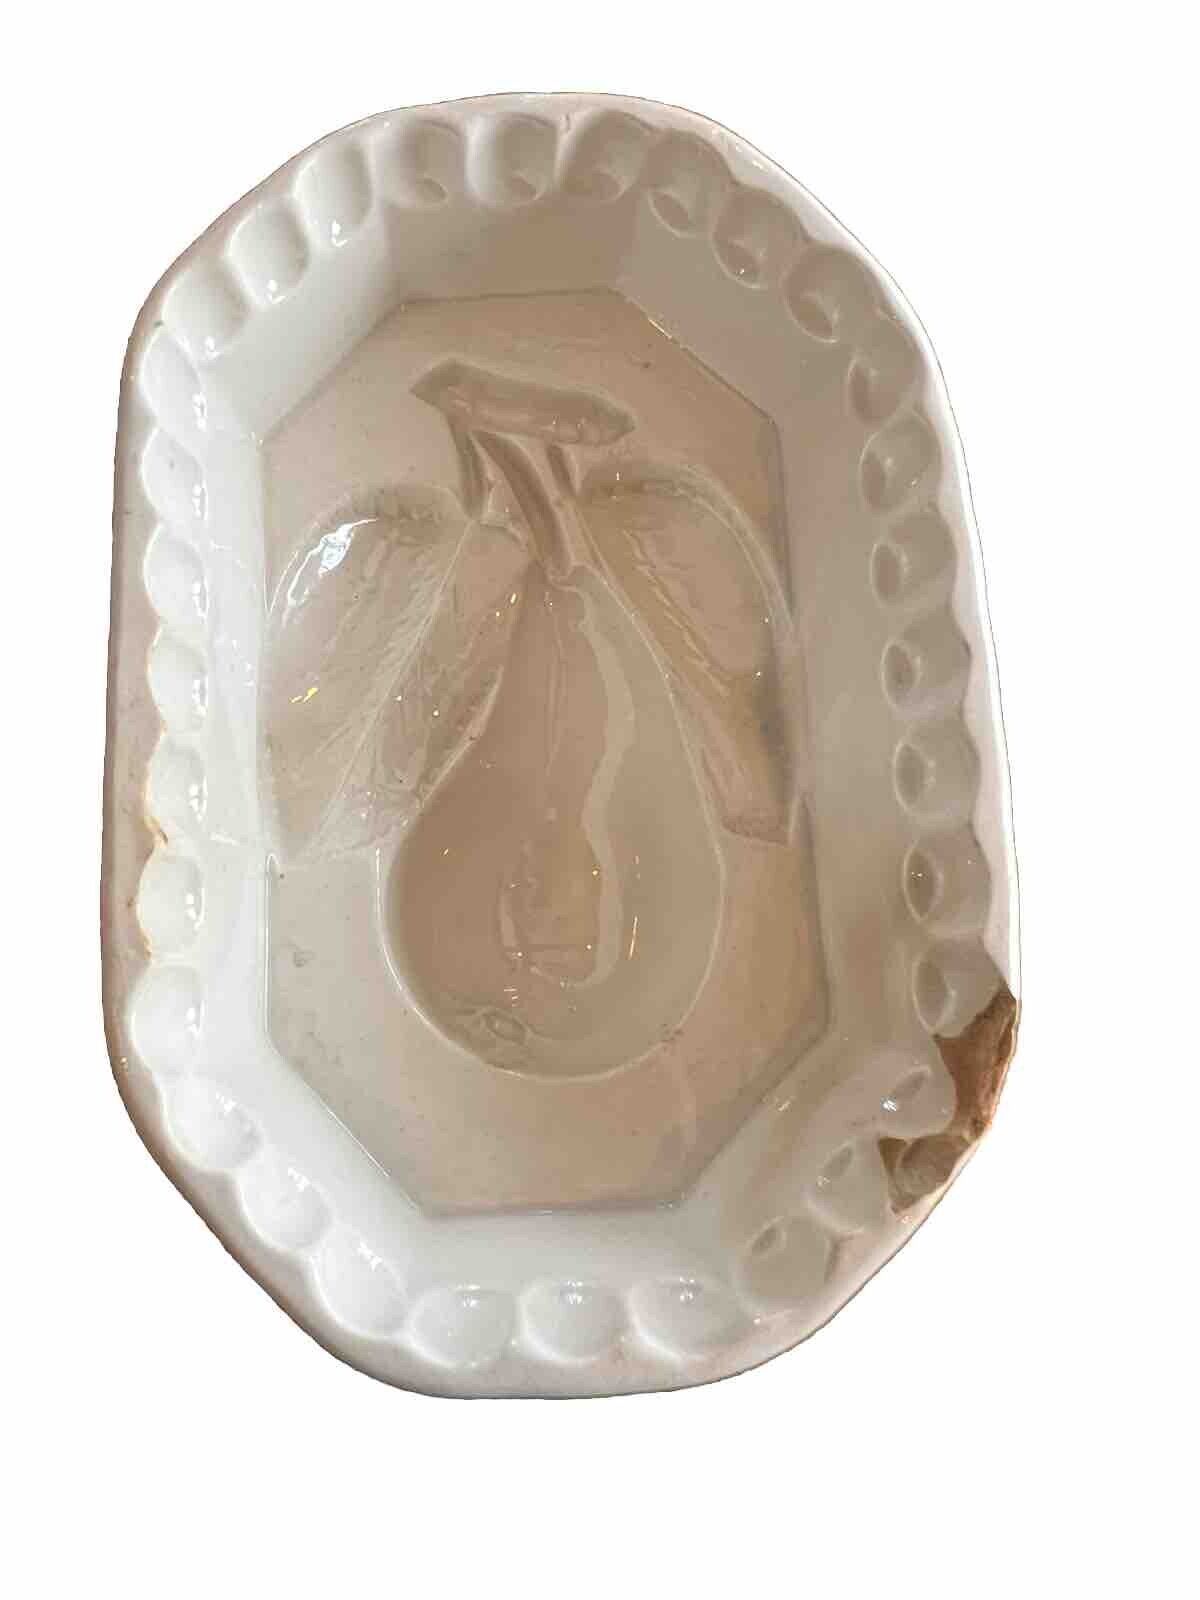 Antique Wedgwood Ironstone Child’s Jelly Mould/Mold with Pear Design, C 1850